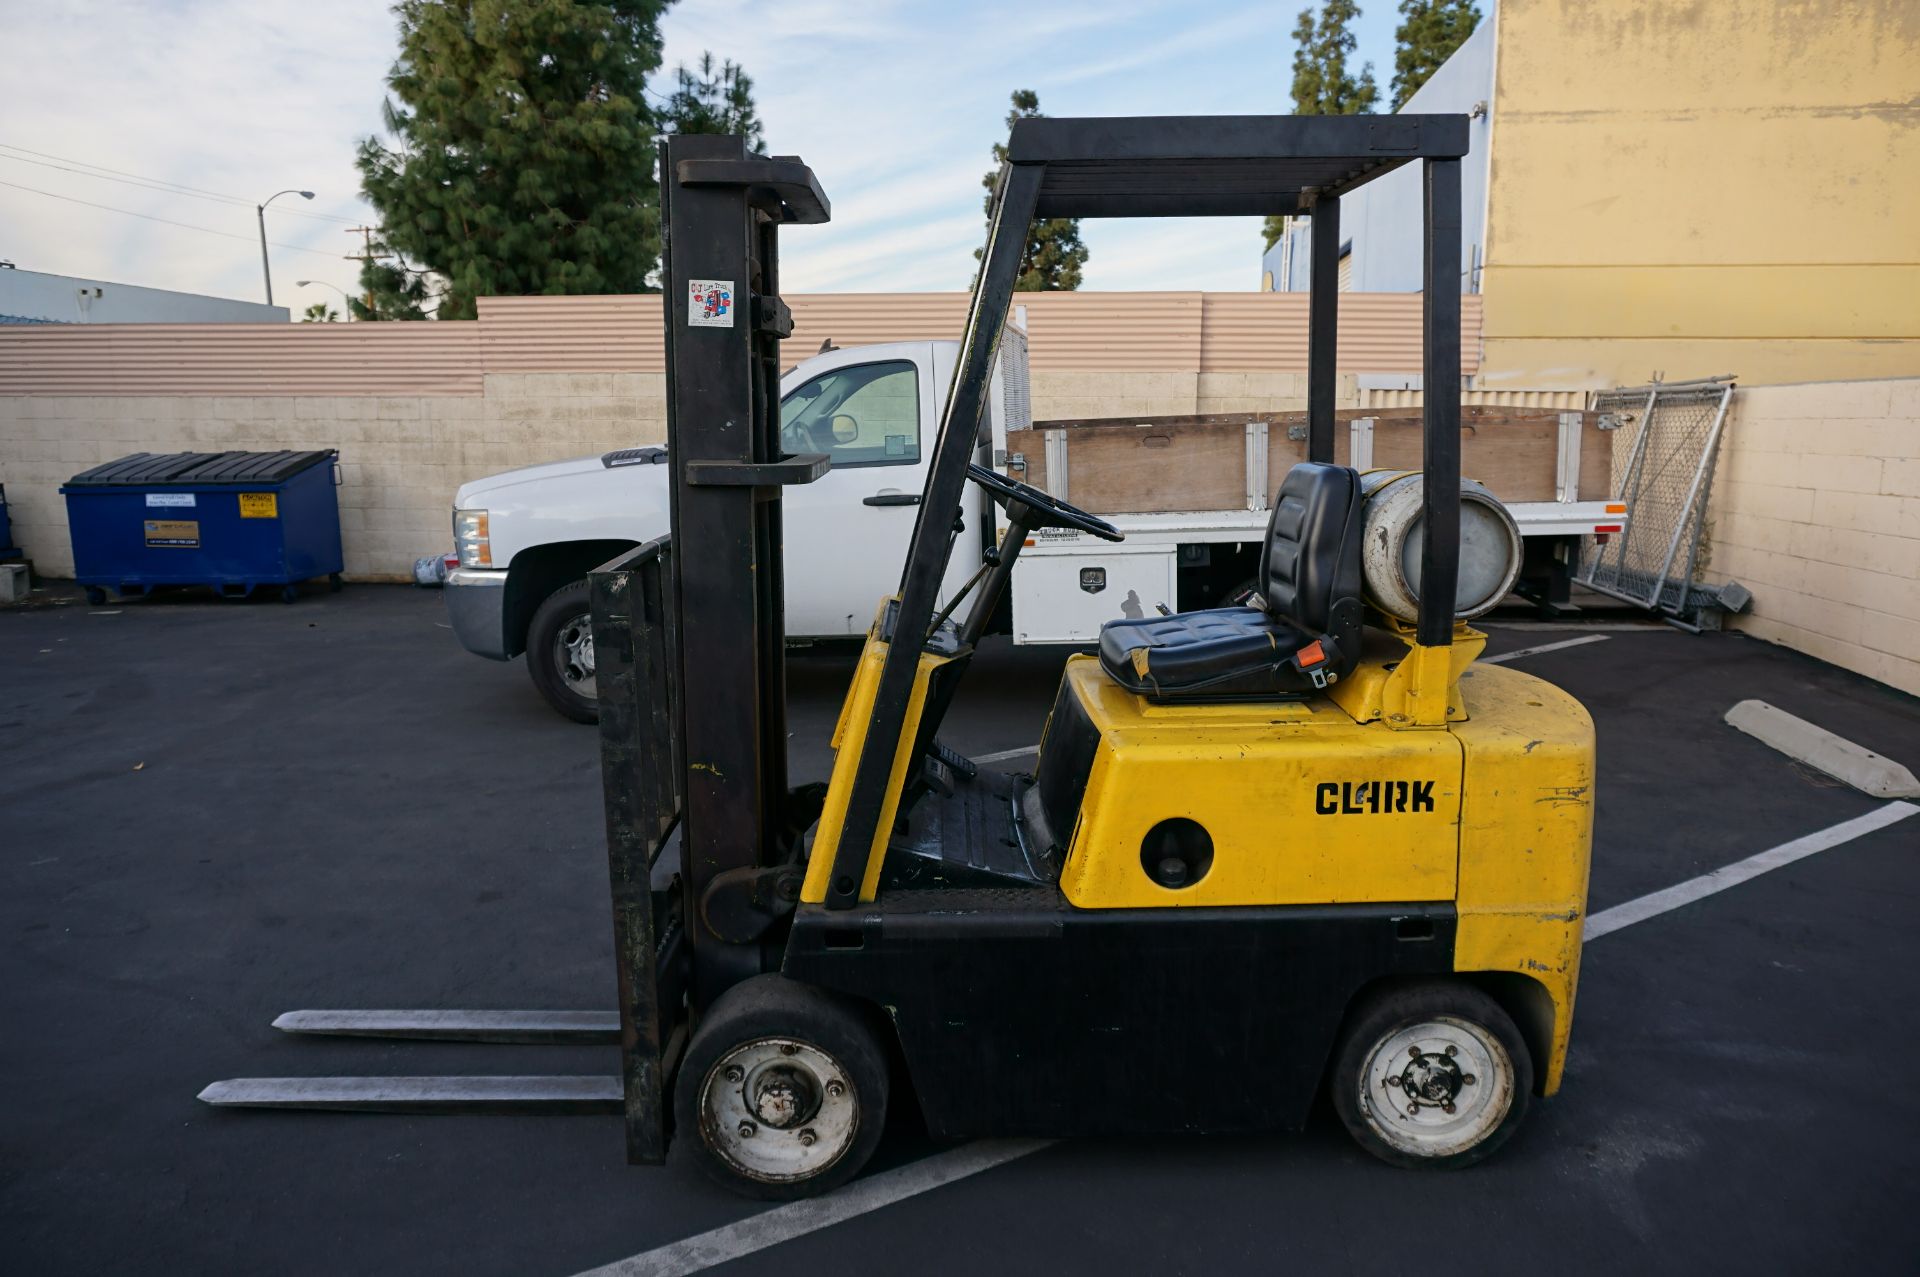 CLARK C50 FORKLIFT 4000 LB CAP, S/N 355-1488-3611, WITH ORIGINAL MANUALS AND CATALOGS - Image 3 of 7